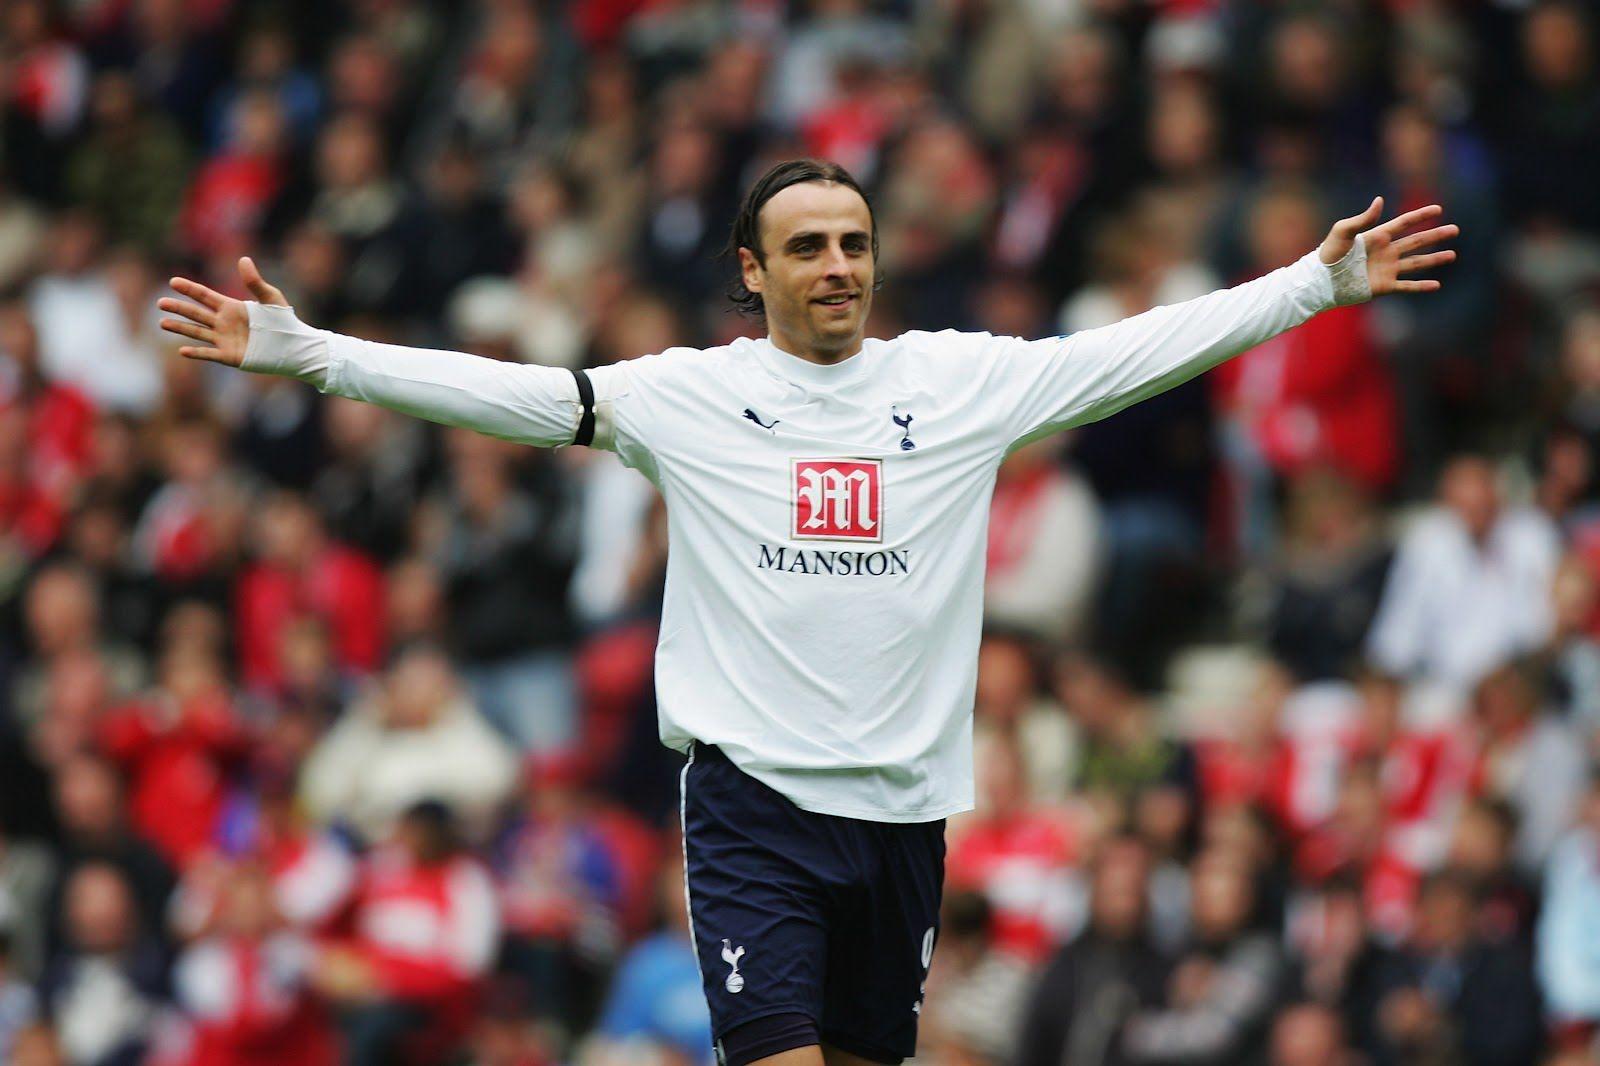 Dimitar Berbatov says he had not heard of Spurs before he joined